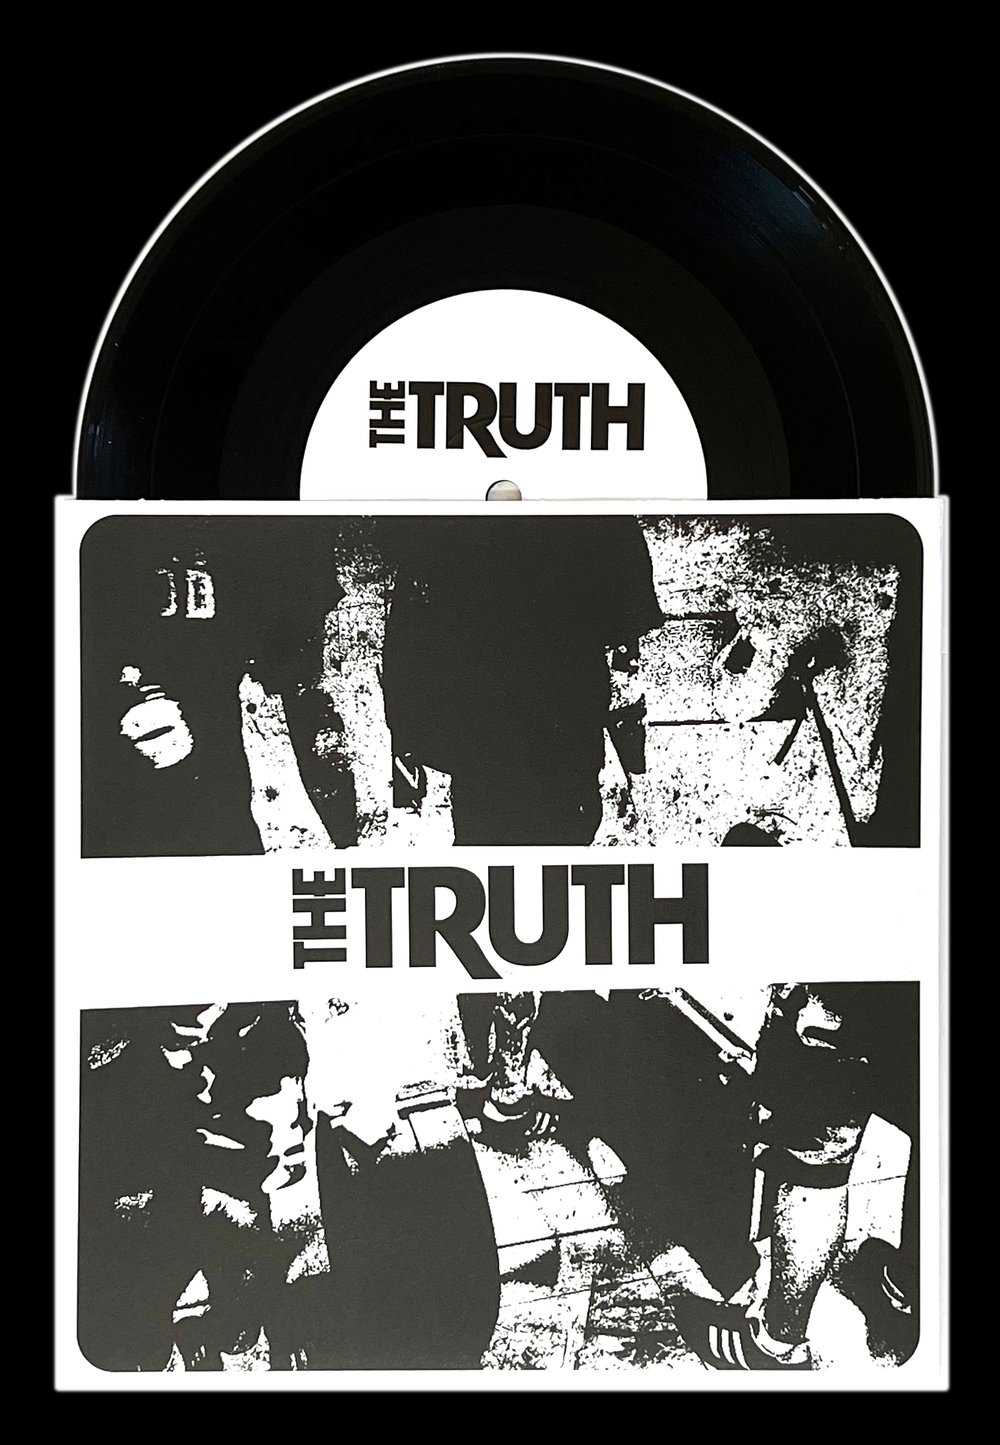 THE TRUTH 'S/T' 7" EP